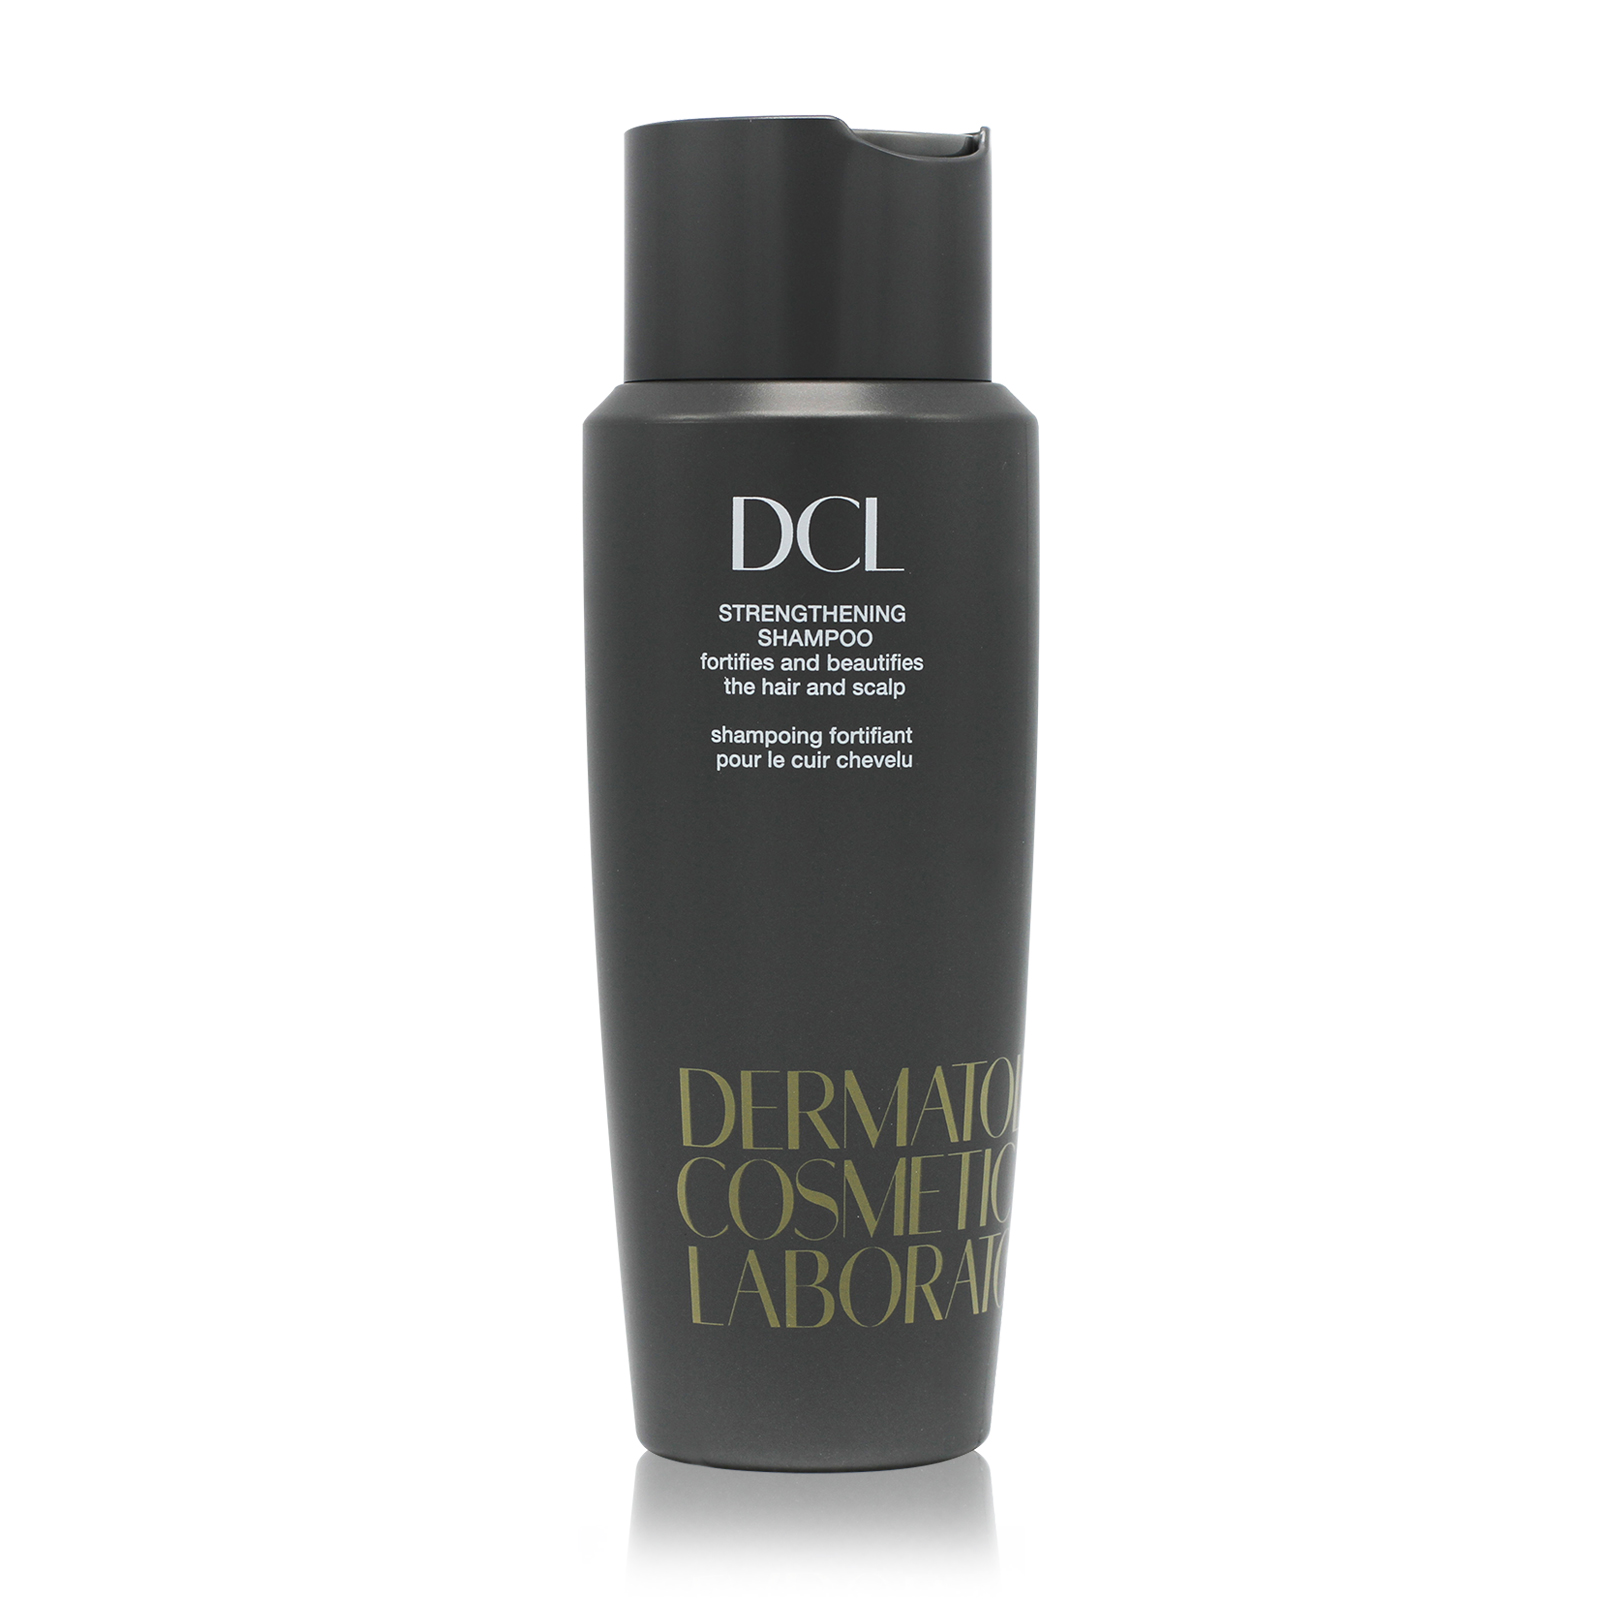 DCL Strengthening Shampoo